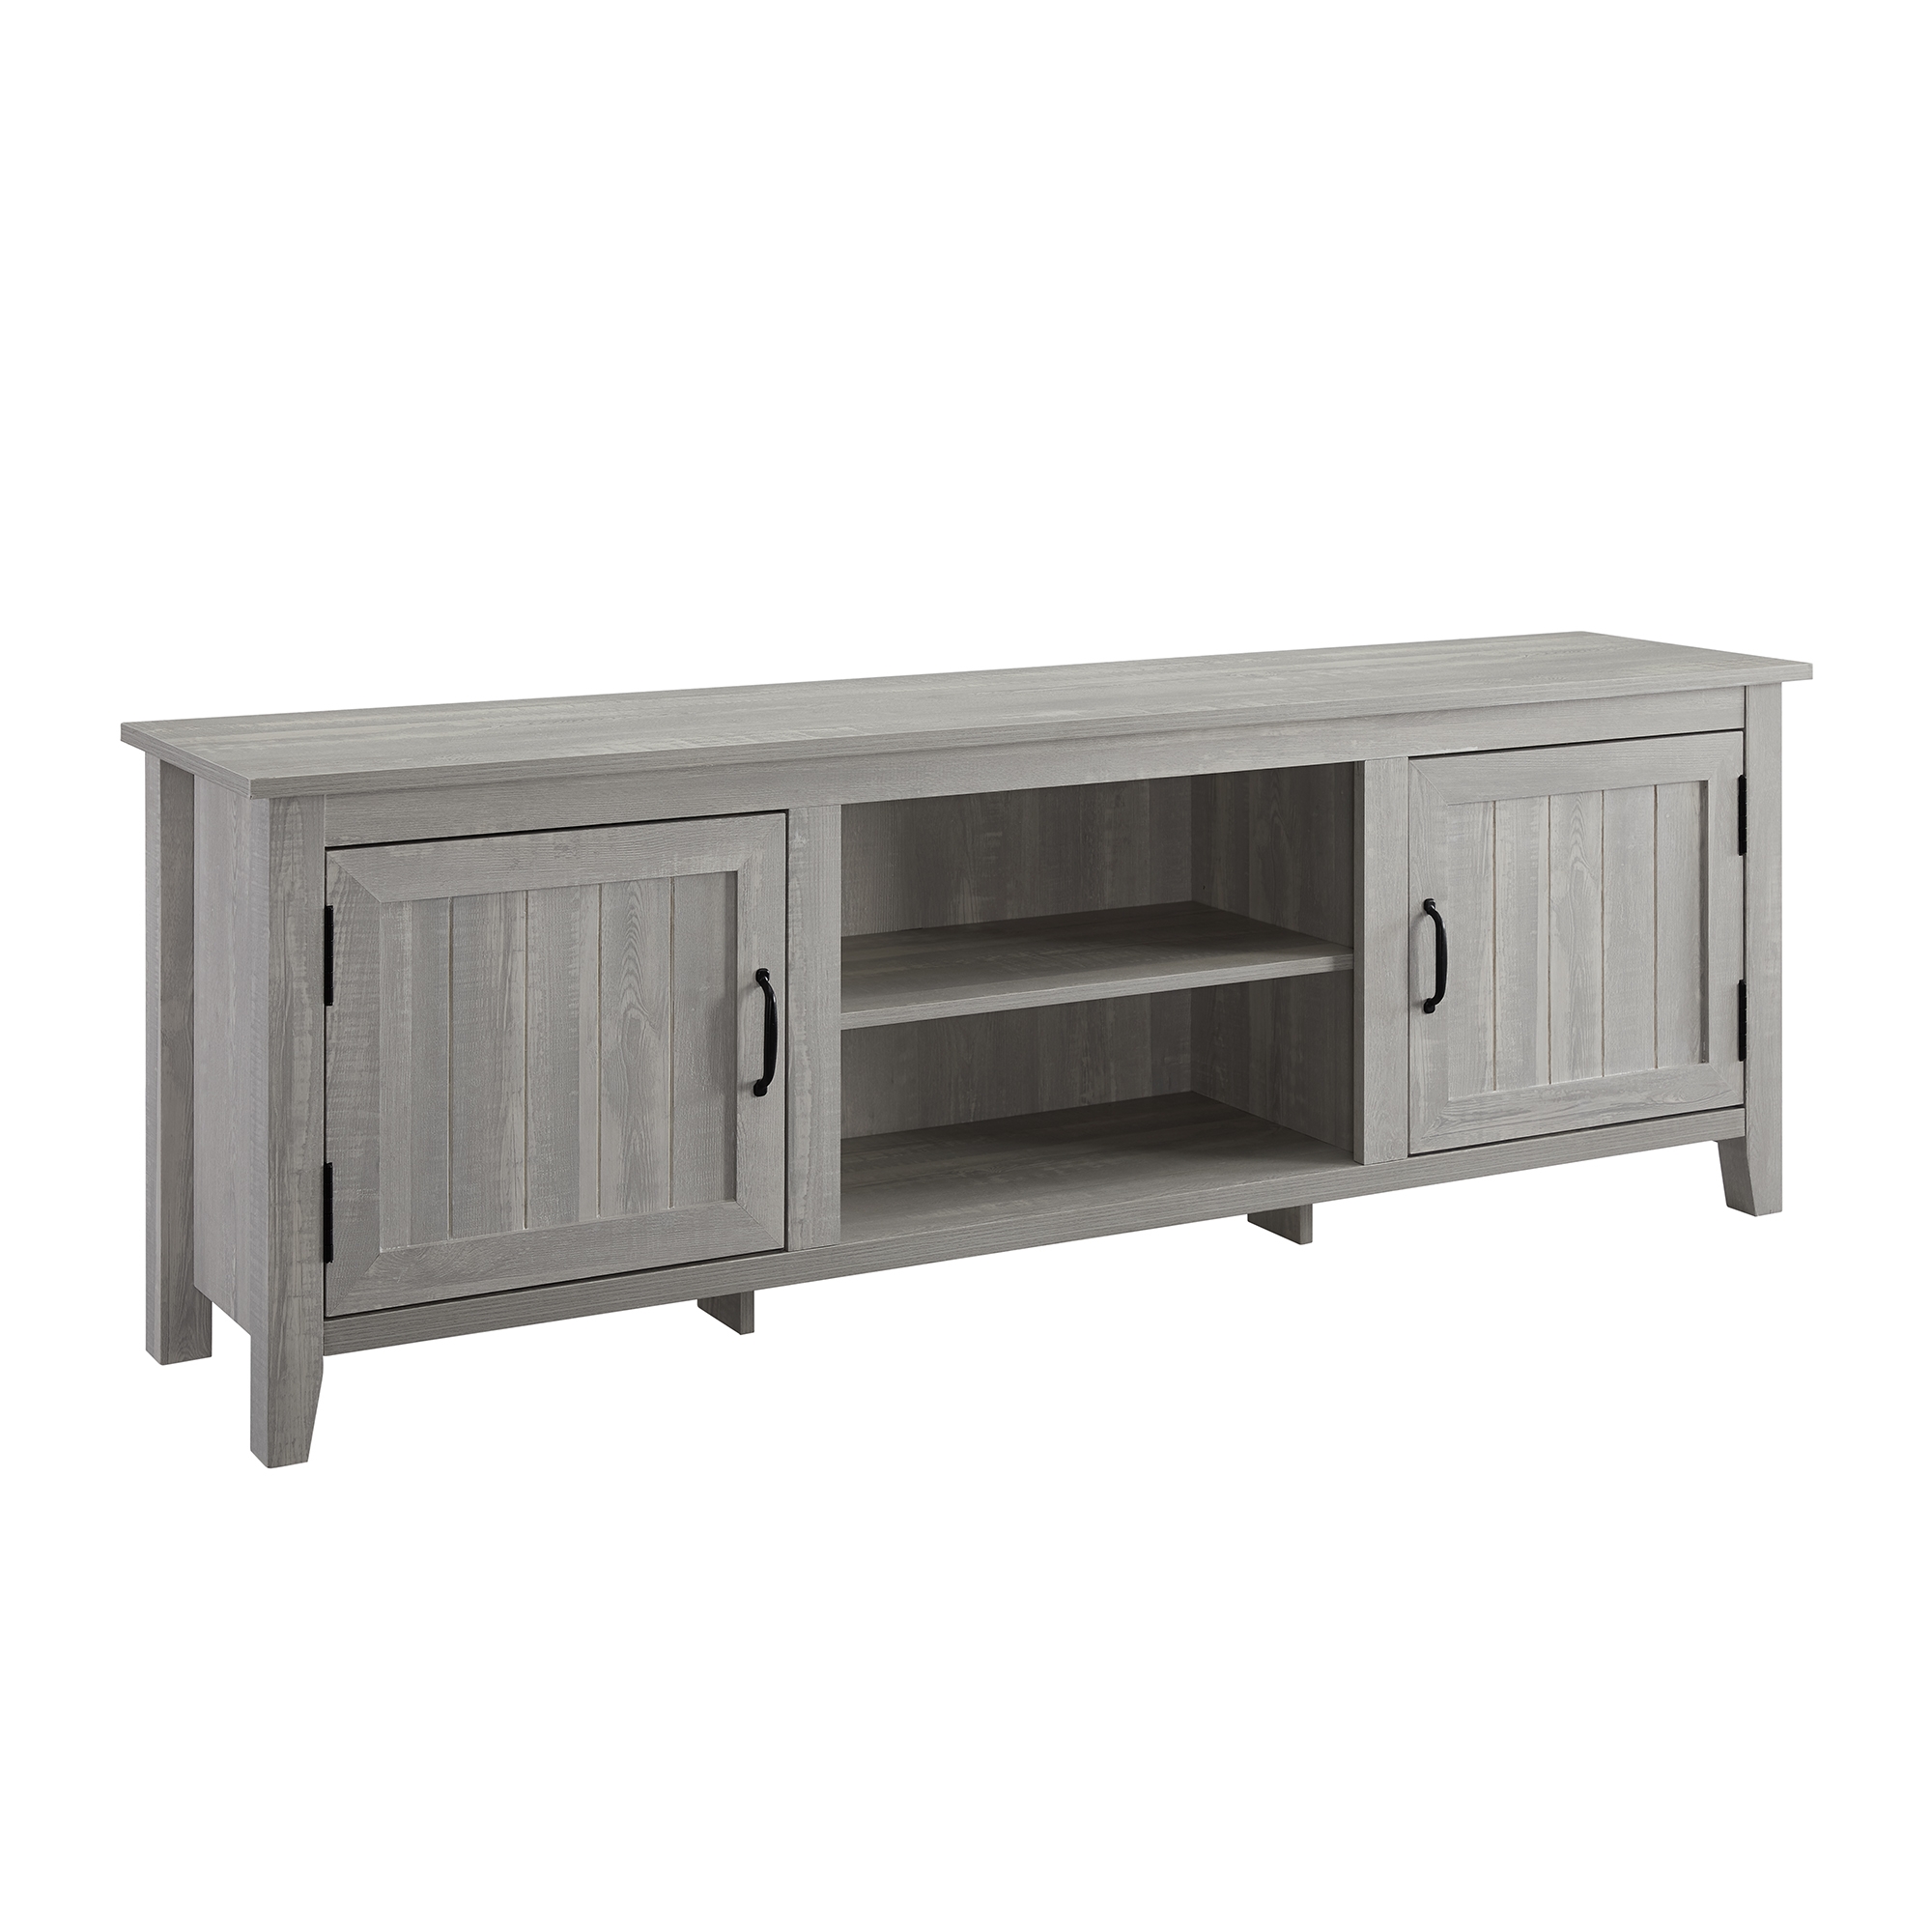 70" Modern Farmhouse Simple Grooved Door Wood TV Stand - Stone Grey - Image 0